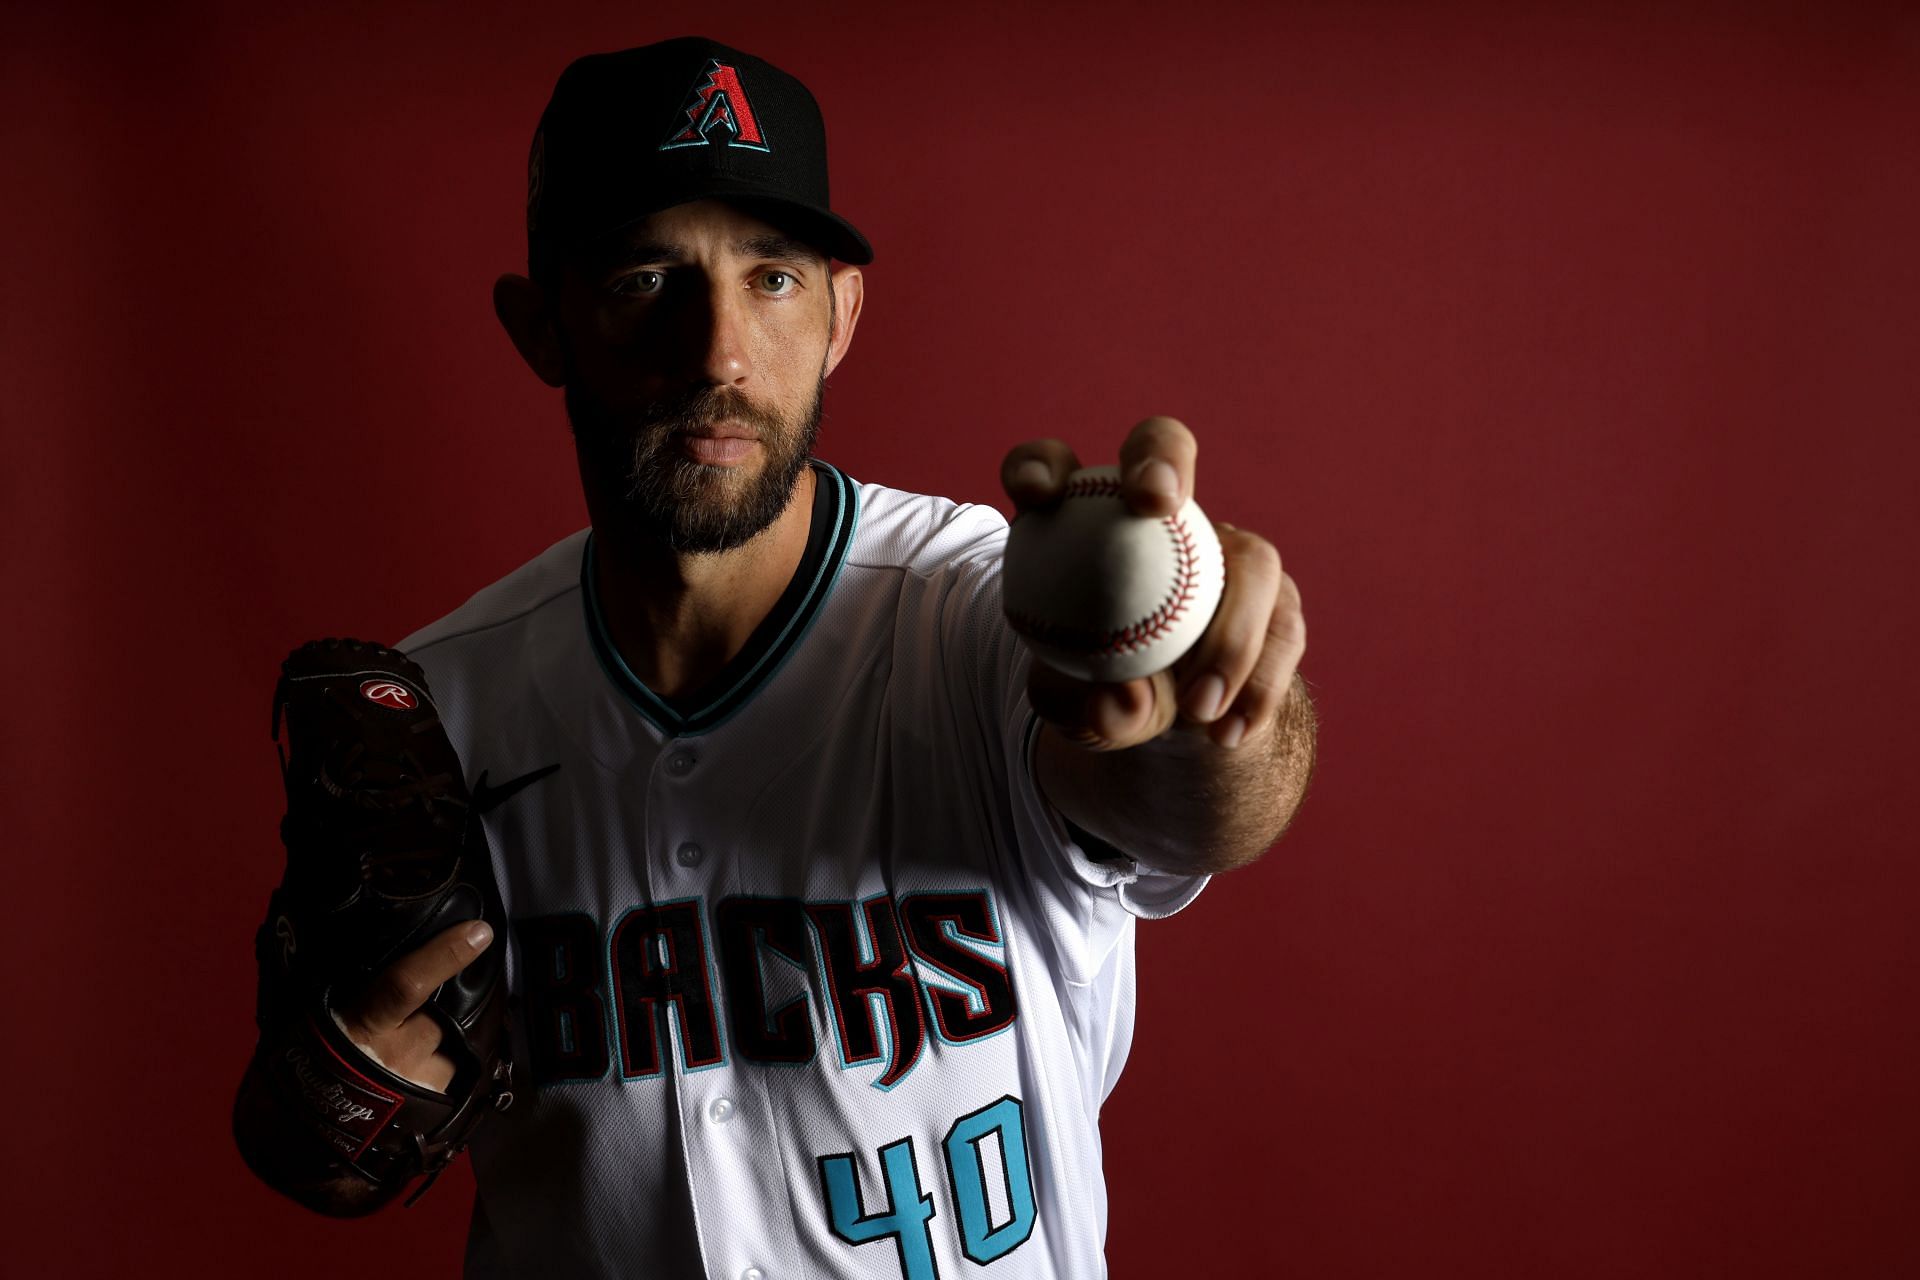 D-backs' Bumgarner taking 'slow drip approach,' expected to start Sunday